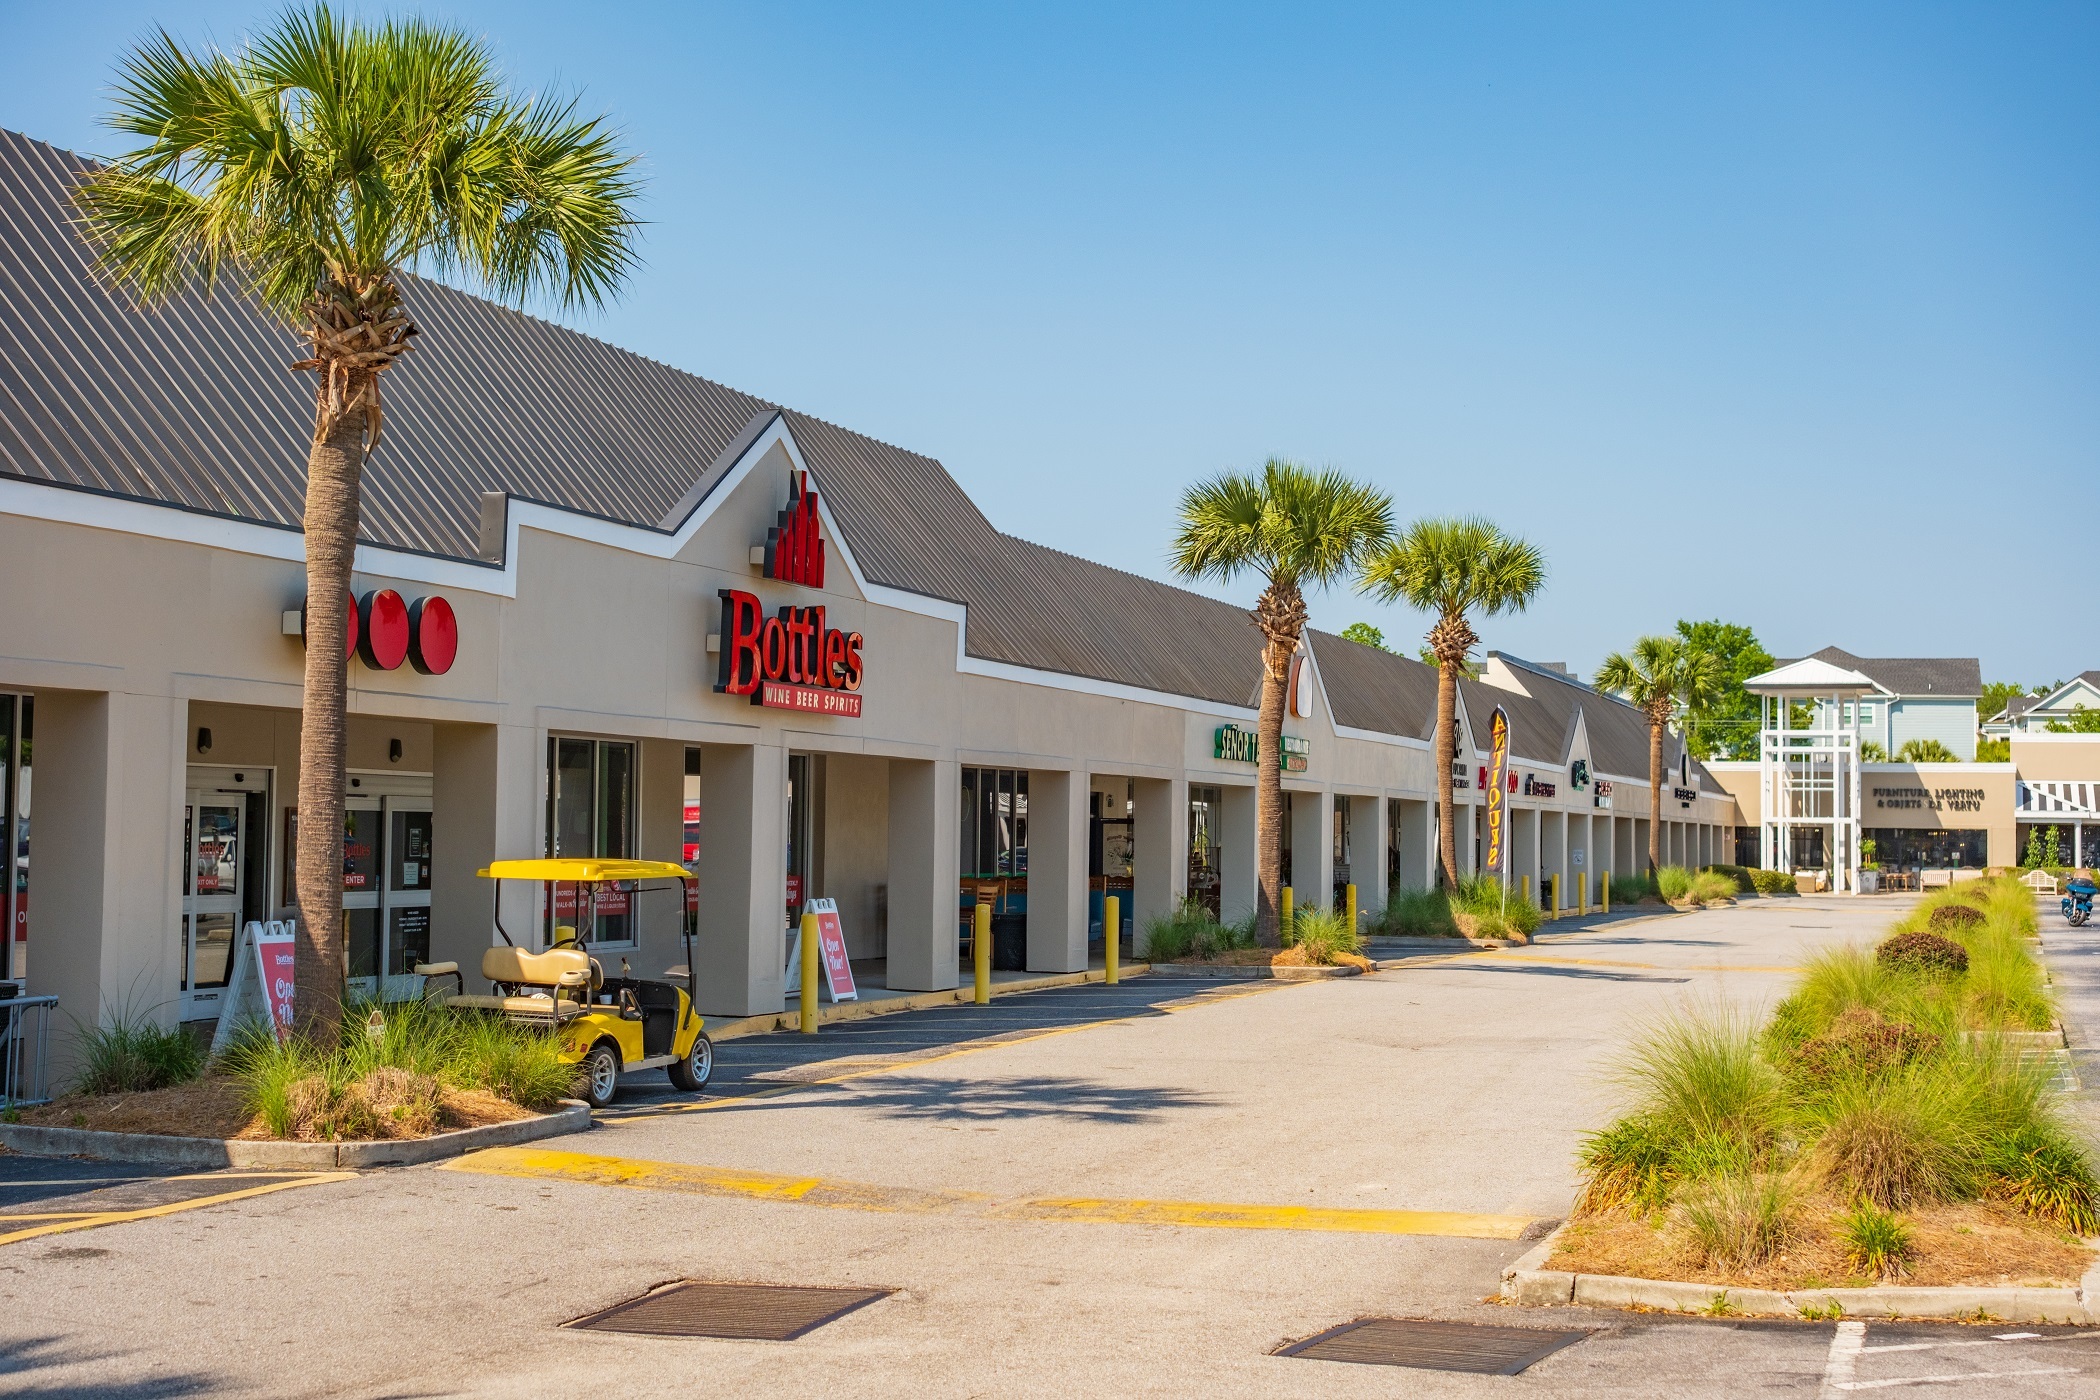 Edens bought the Moultrie Plaza shopping center in Mount Pleasant, South Carolina, a suburb of Charleston. (Edens)